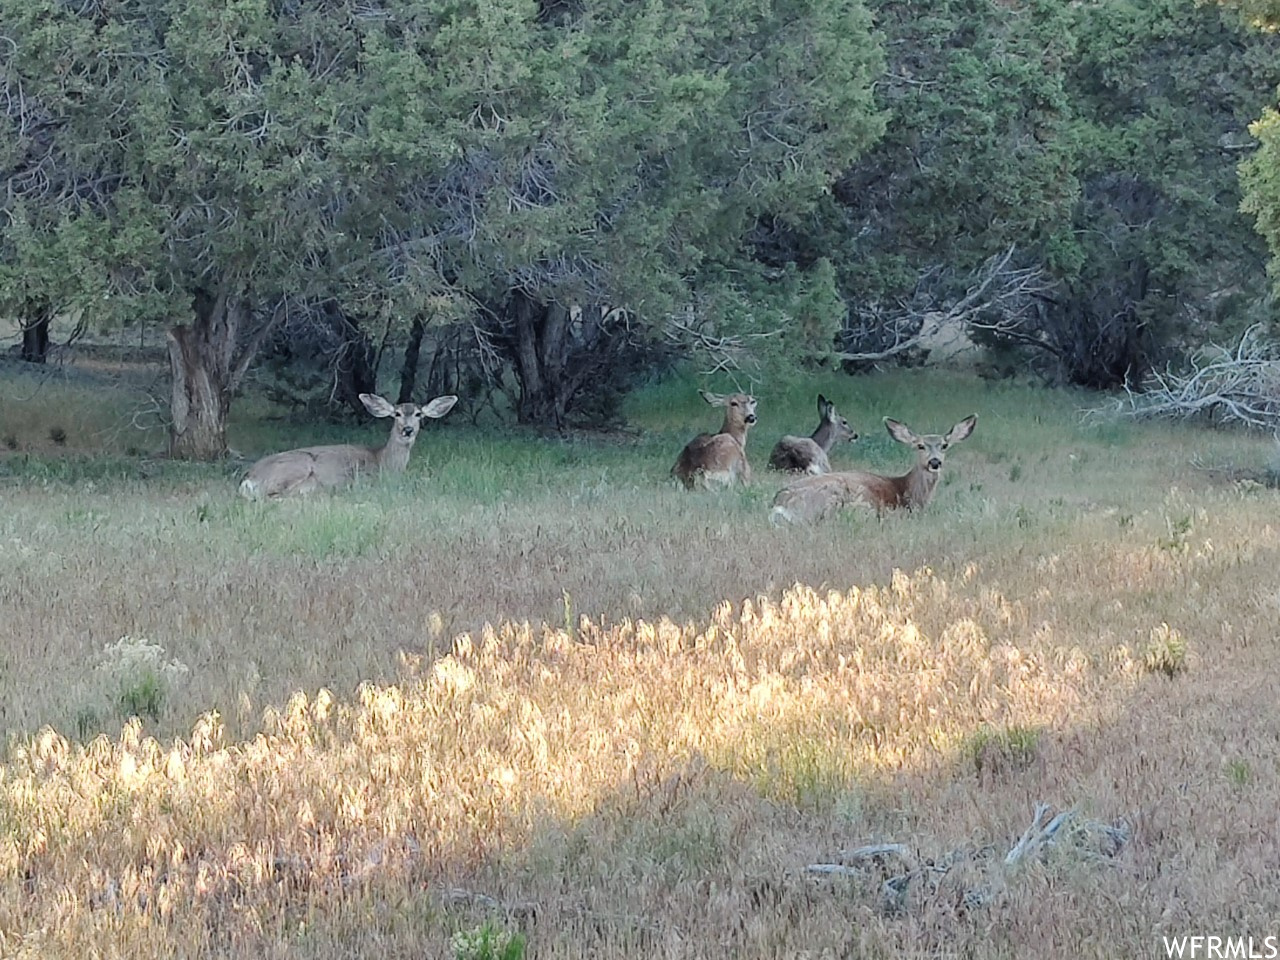 Wildlife are attracted to the secluded and flat areas of the parcel